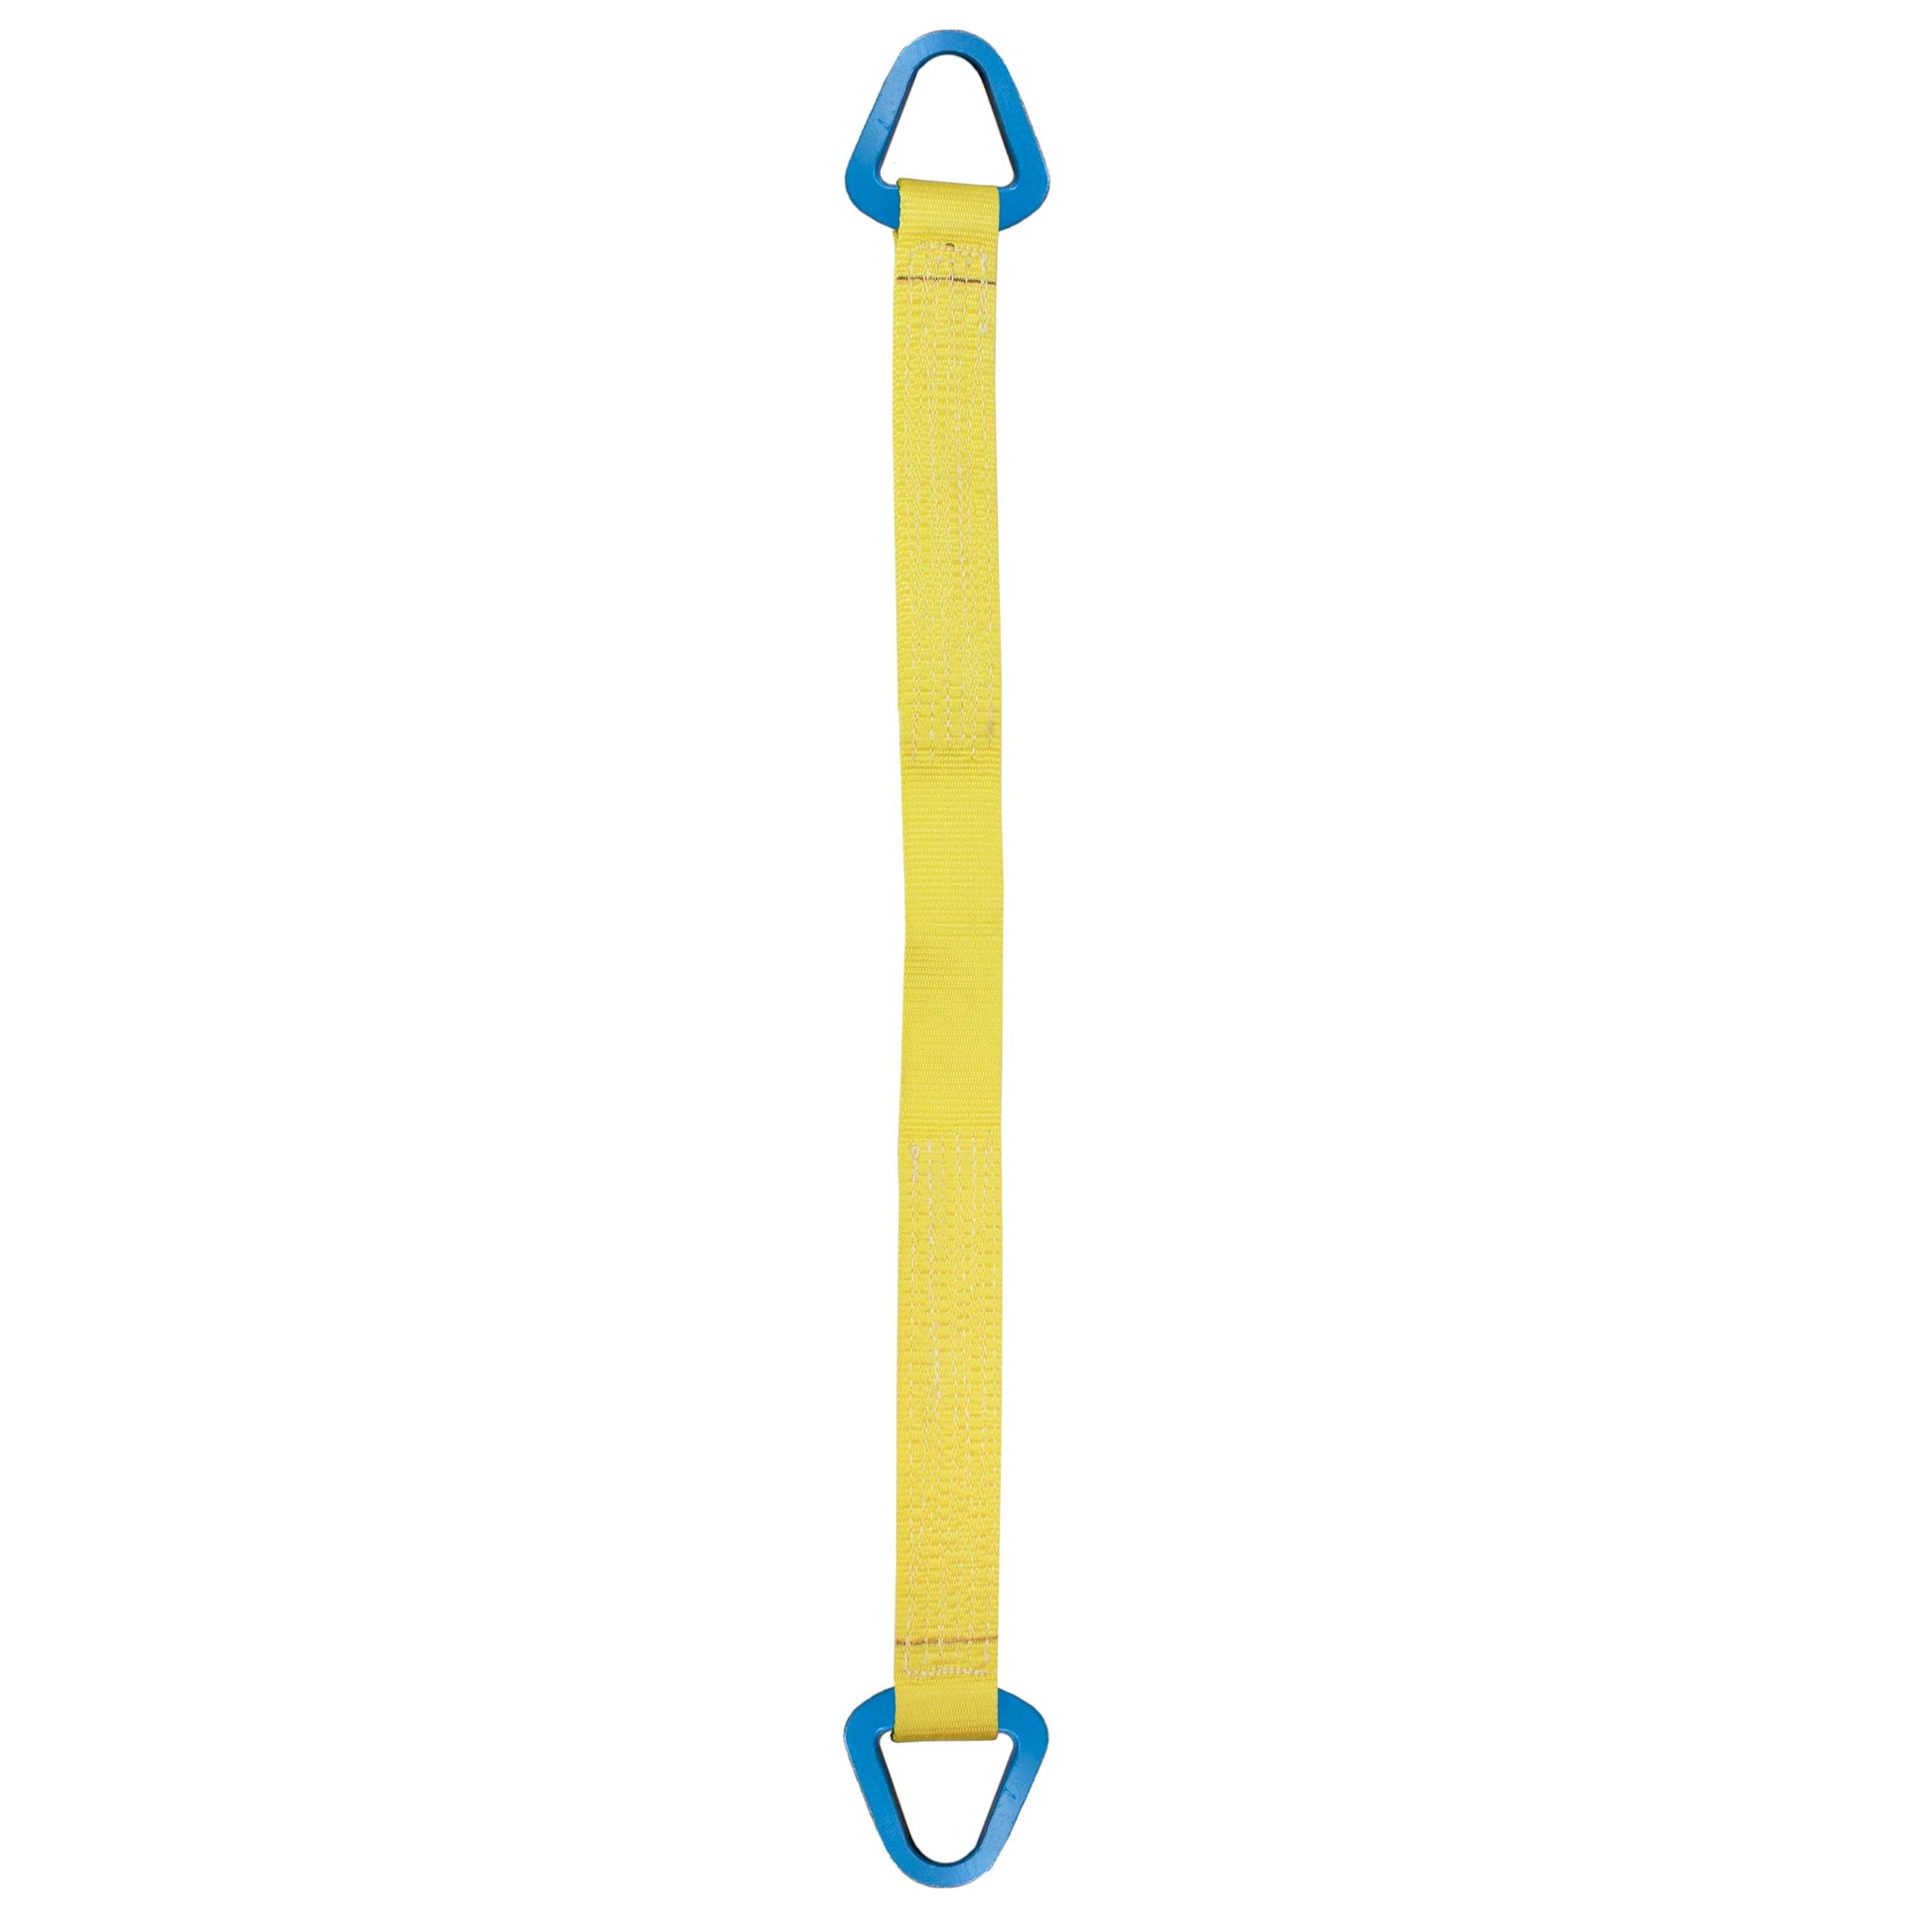 Nylon Lifting Sling Triangle 6 inch x 4 foot 1ply image 1 of 2